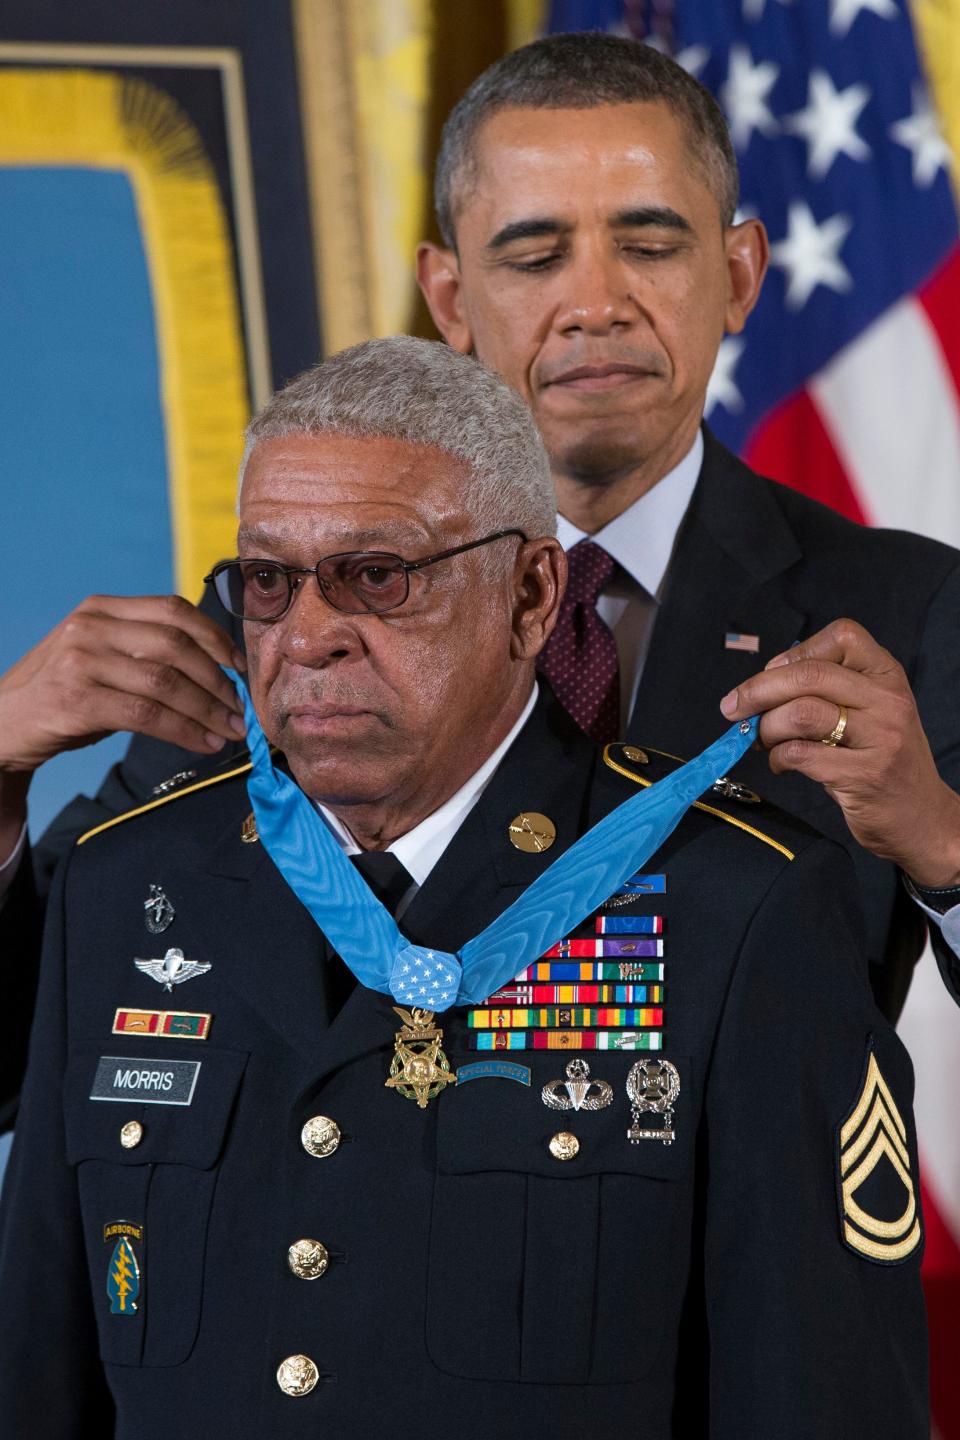 Staff Sgt. Melvin Morris is awarded the Medal of Honor by President Barack Obama.